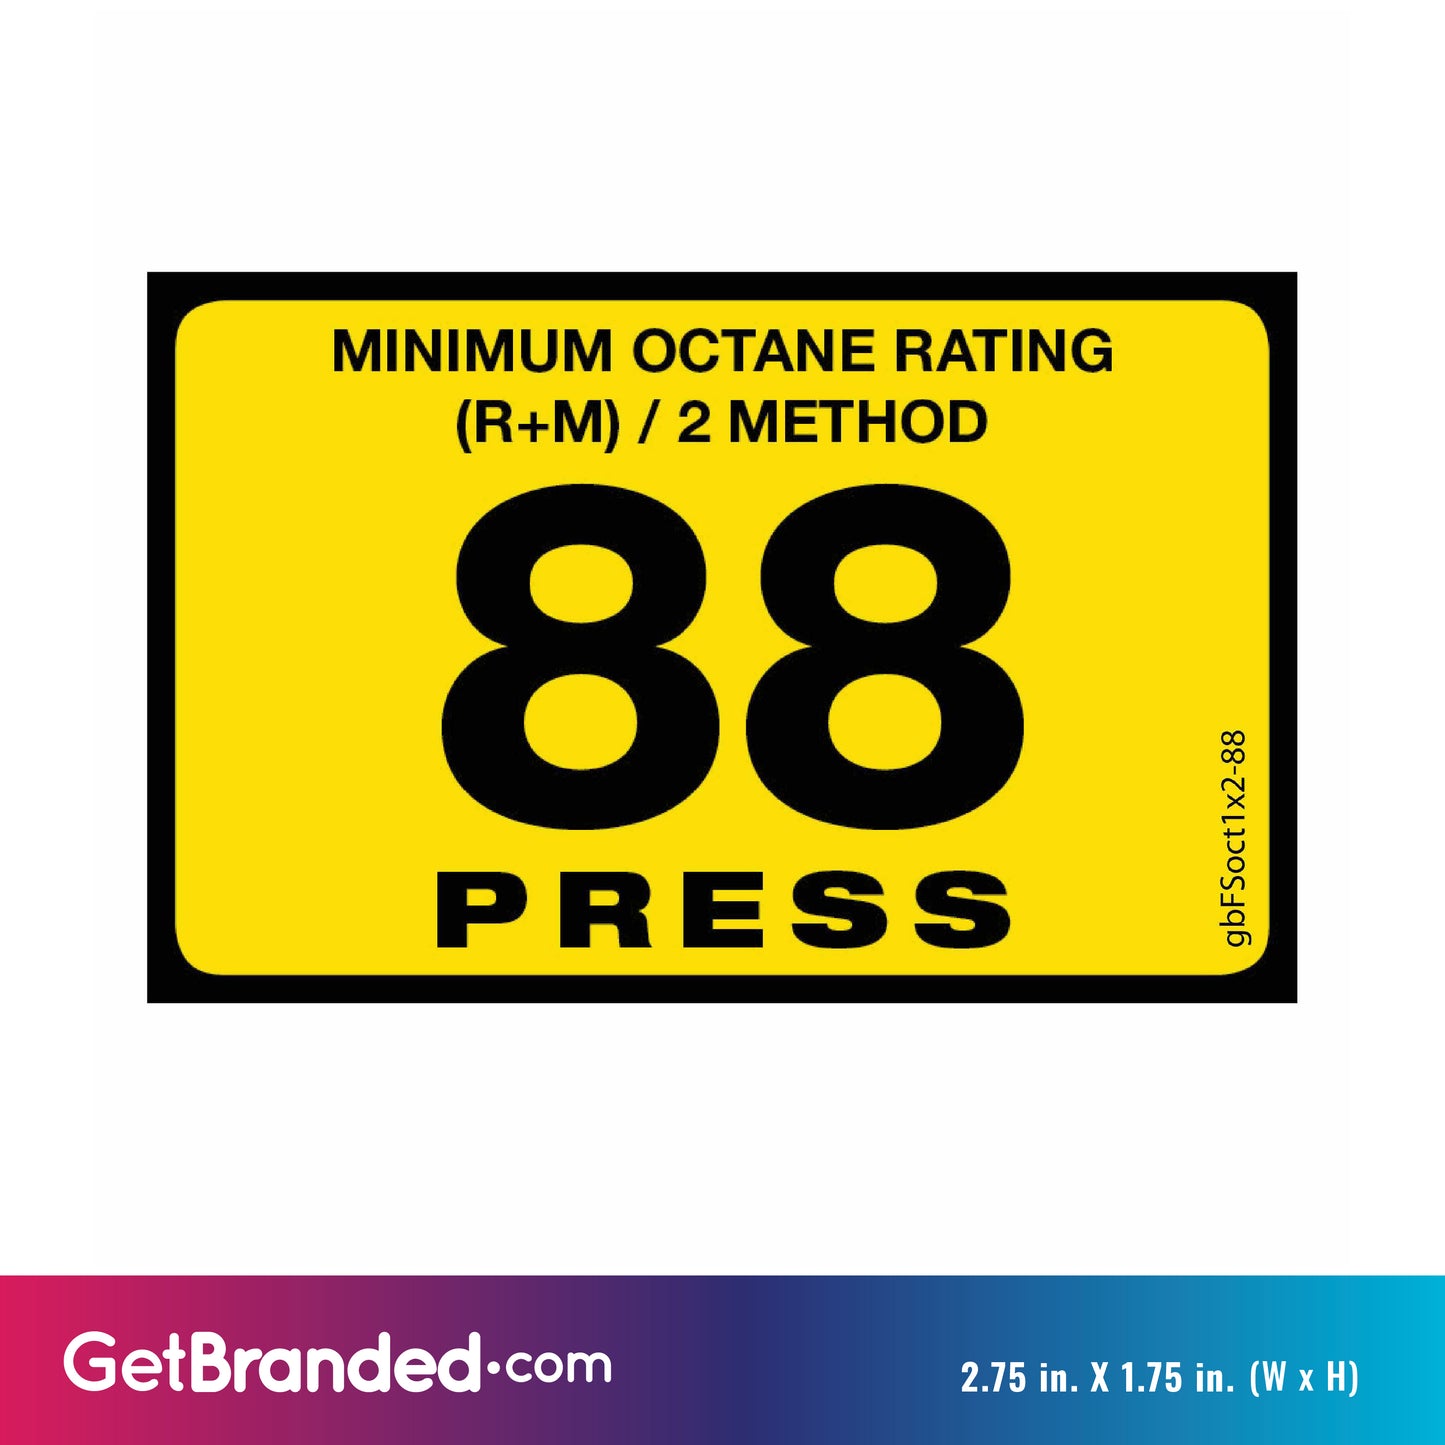 88 Press Octane Rating Decal. 1 inch by 2 inches size guide.